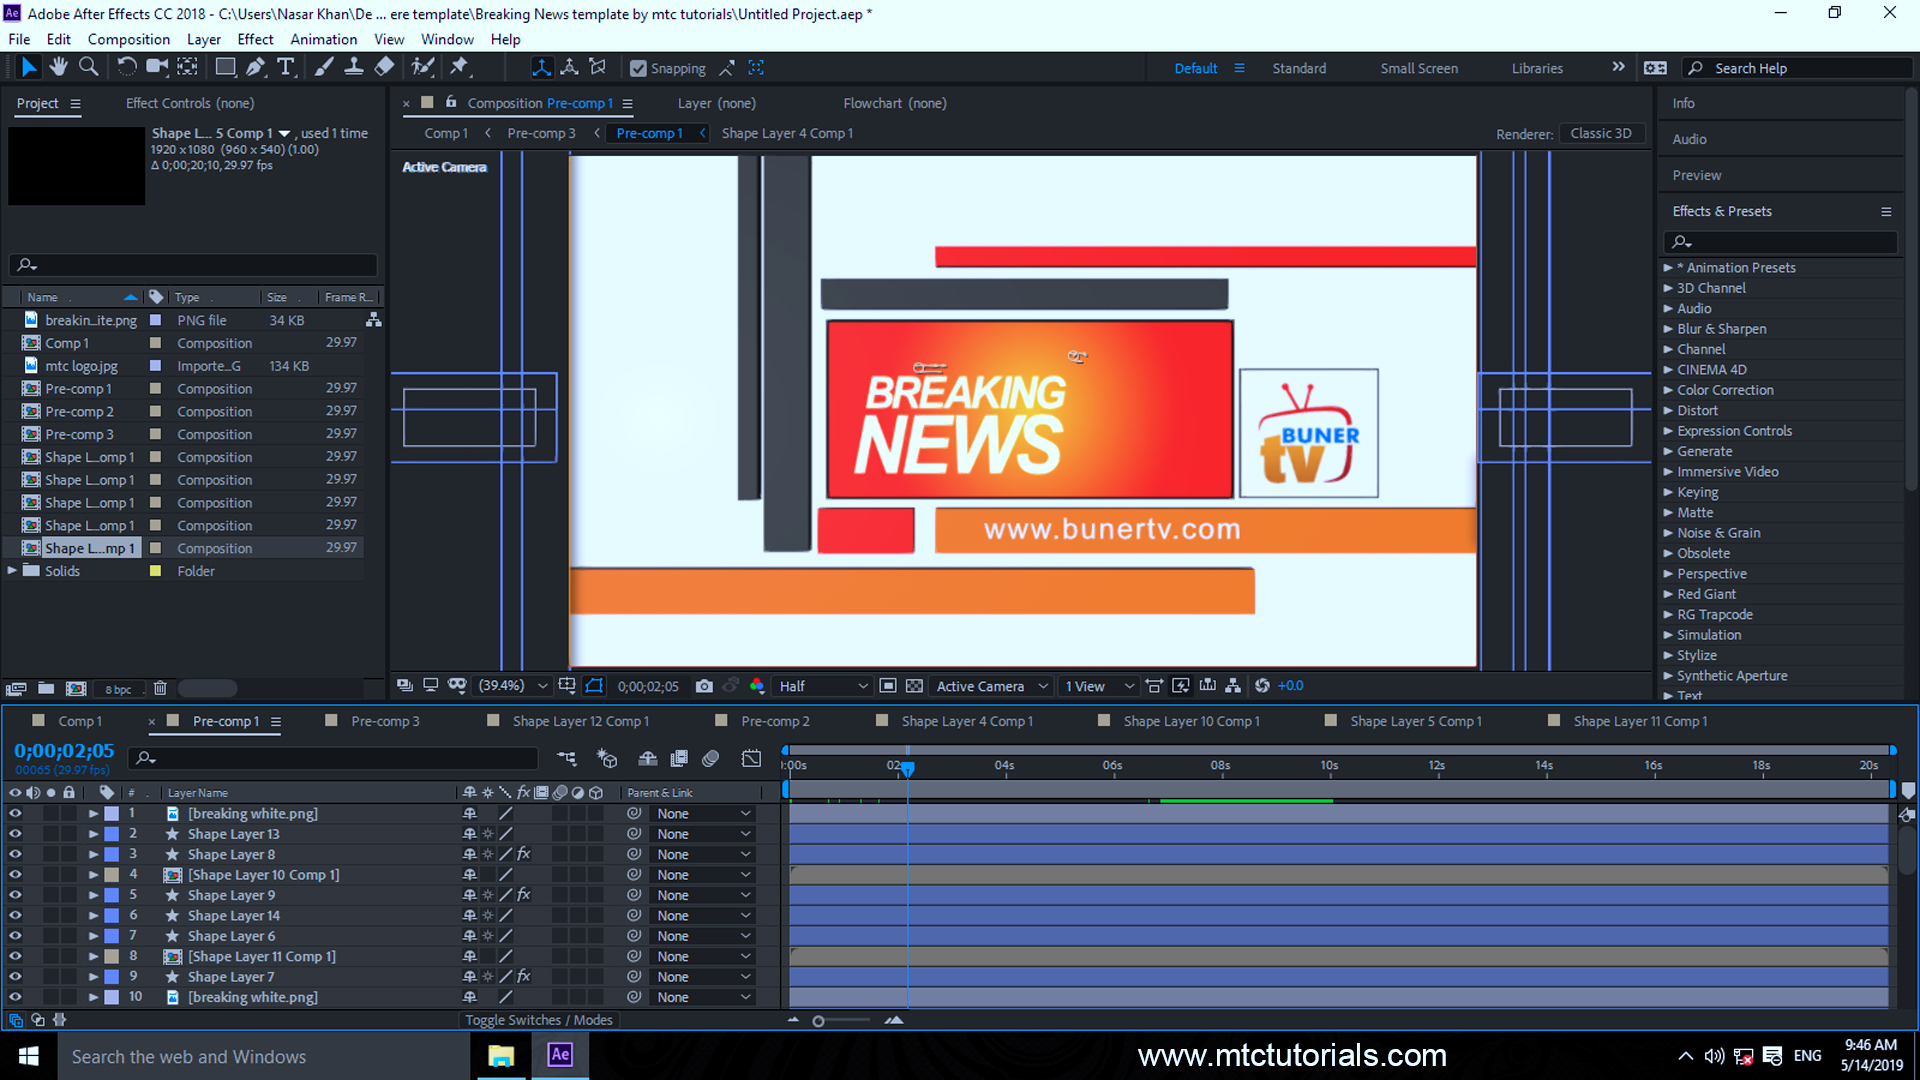 Download Free Breaking News After Effects Templates Mtc Tutorials